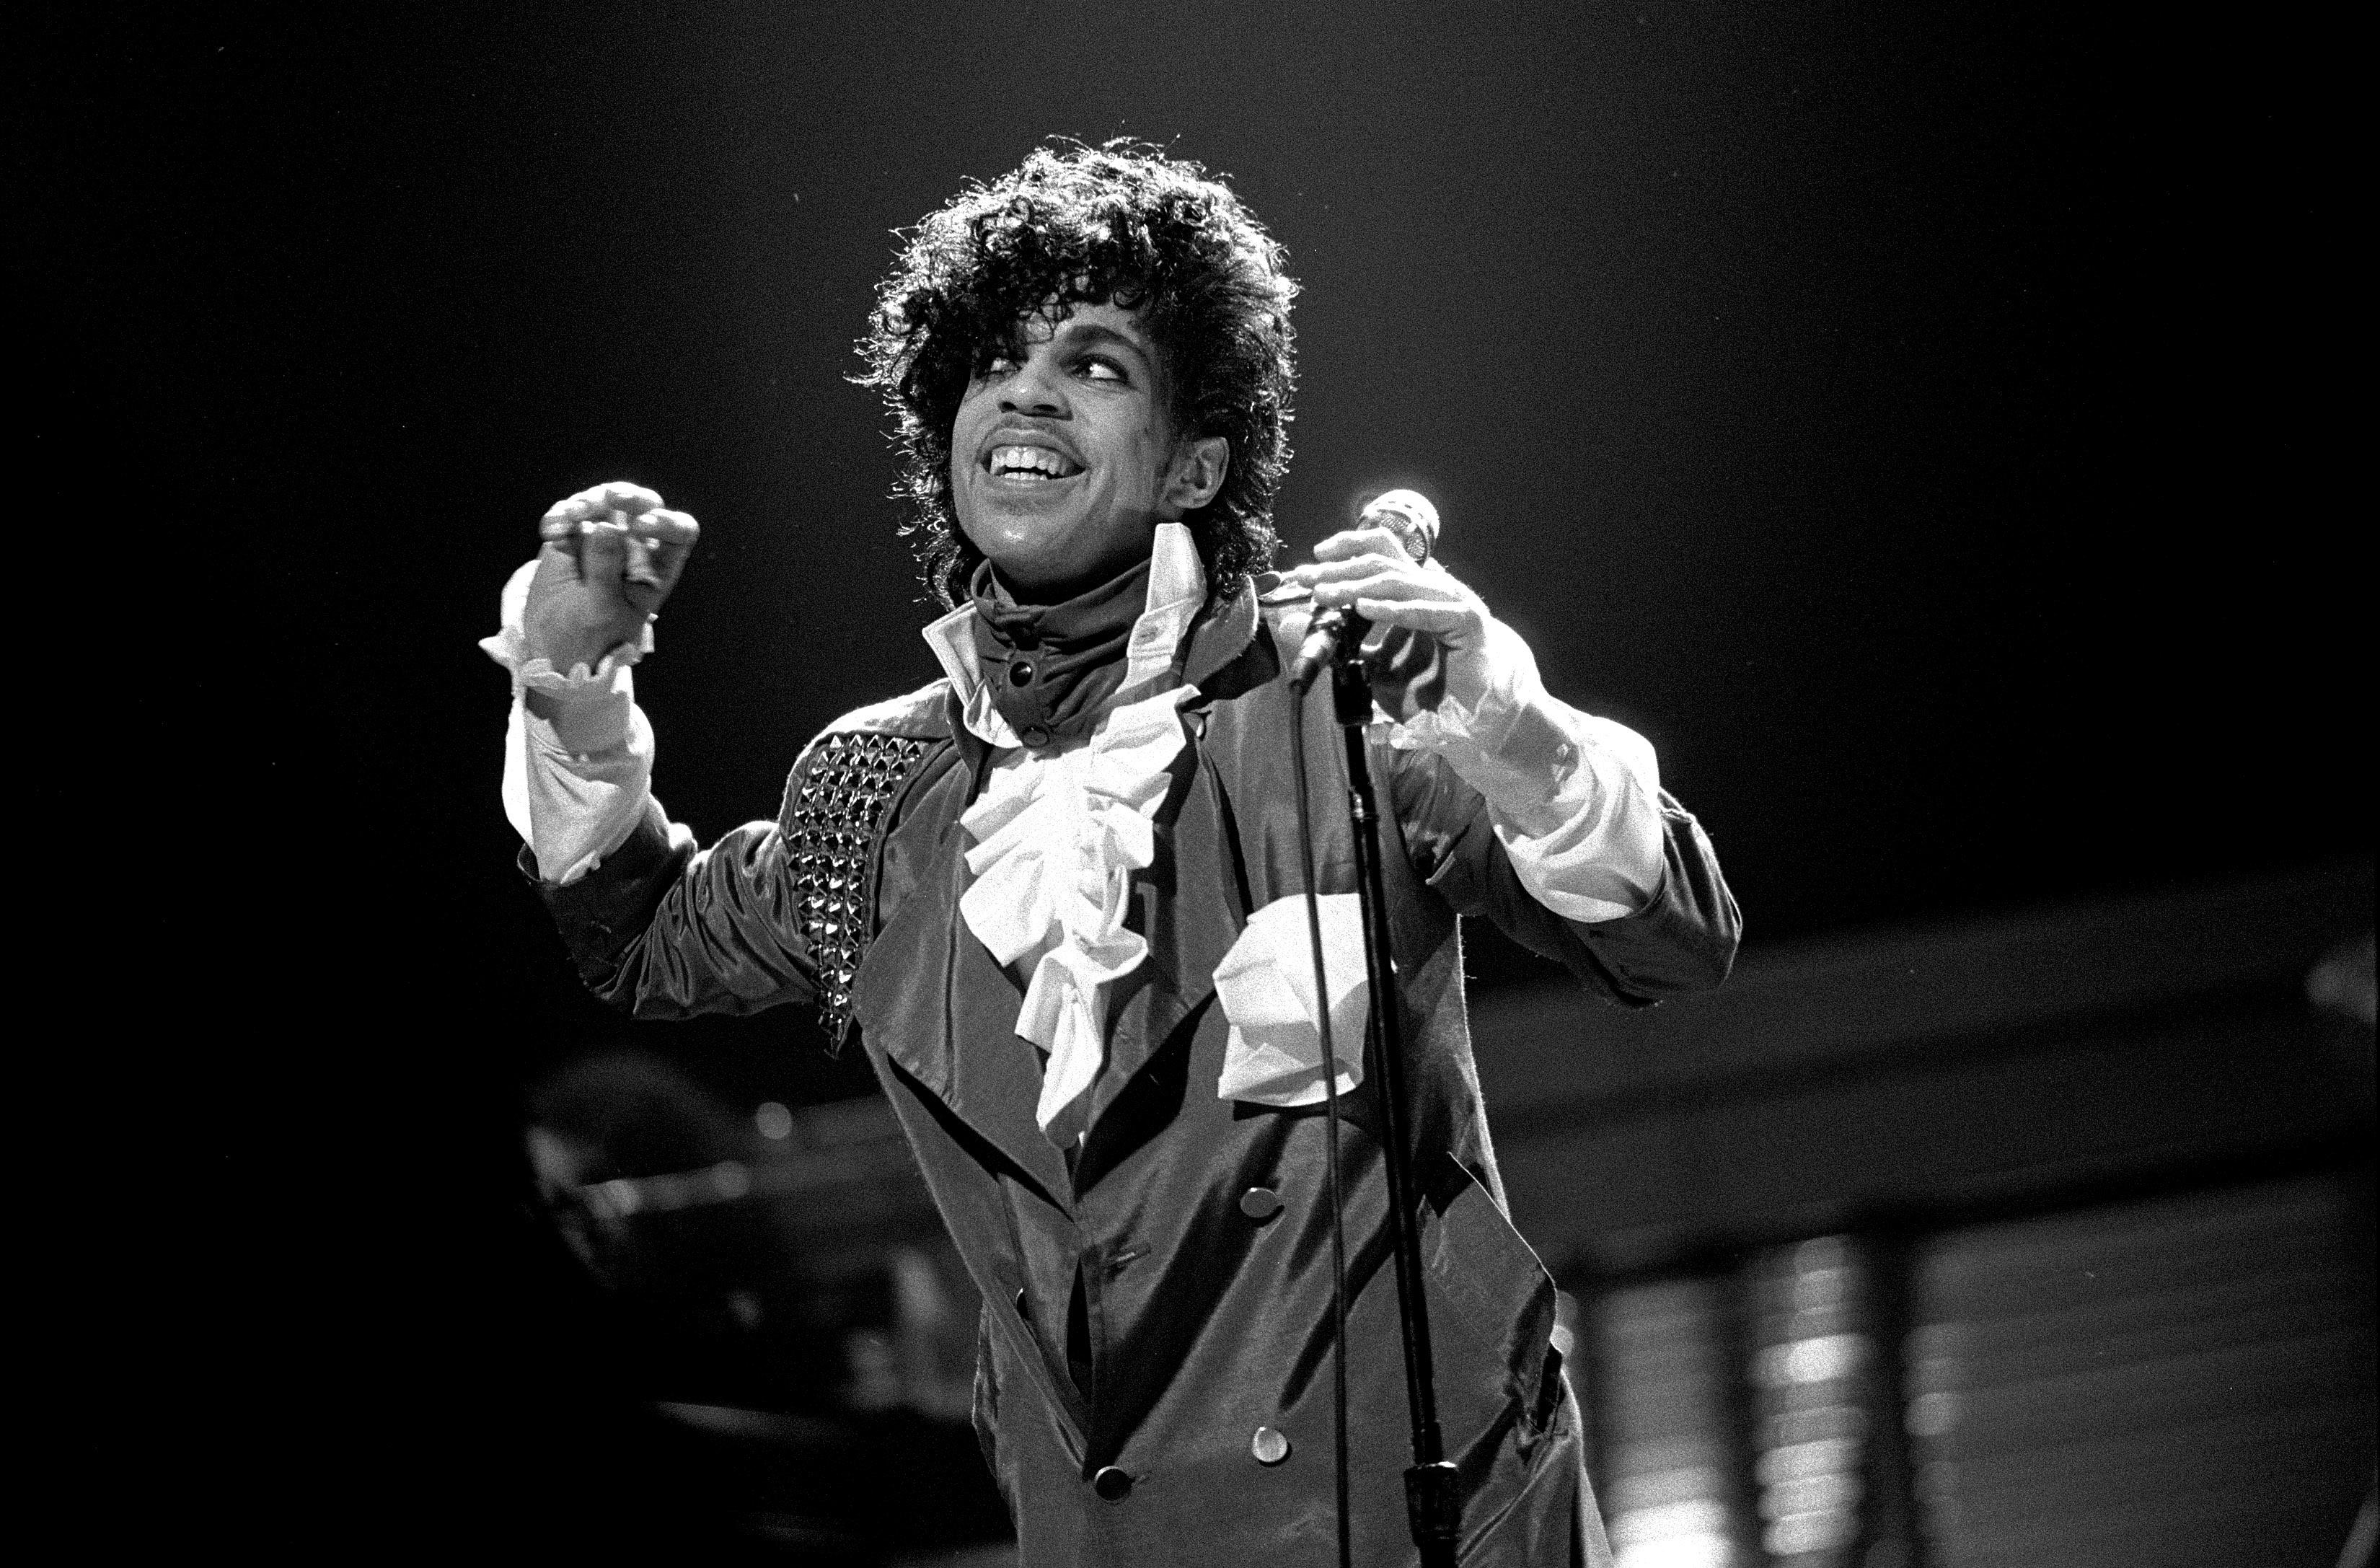 Prince performs at the Auditorium Theatre in 1982. (Courtesy Paul Natkin)